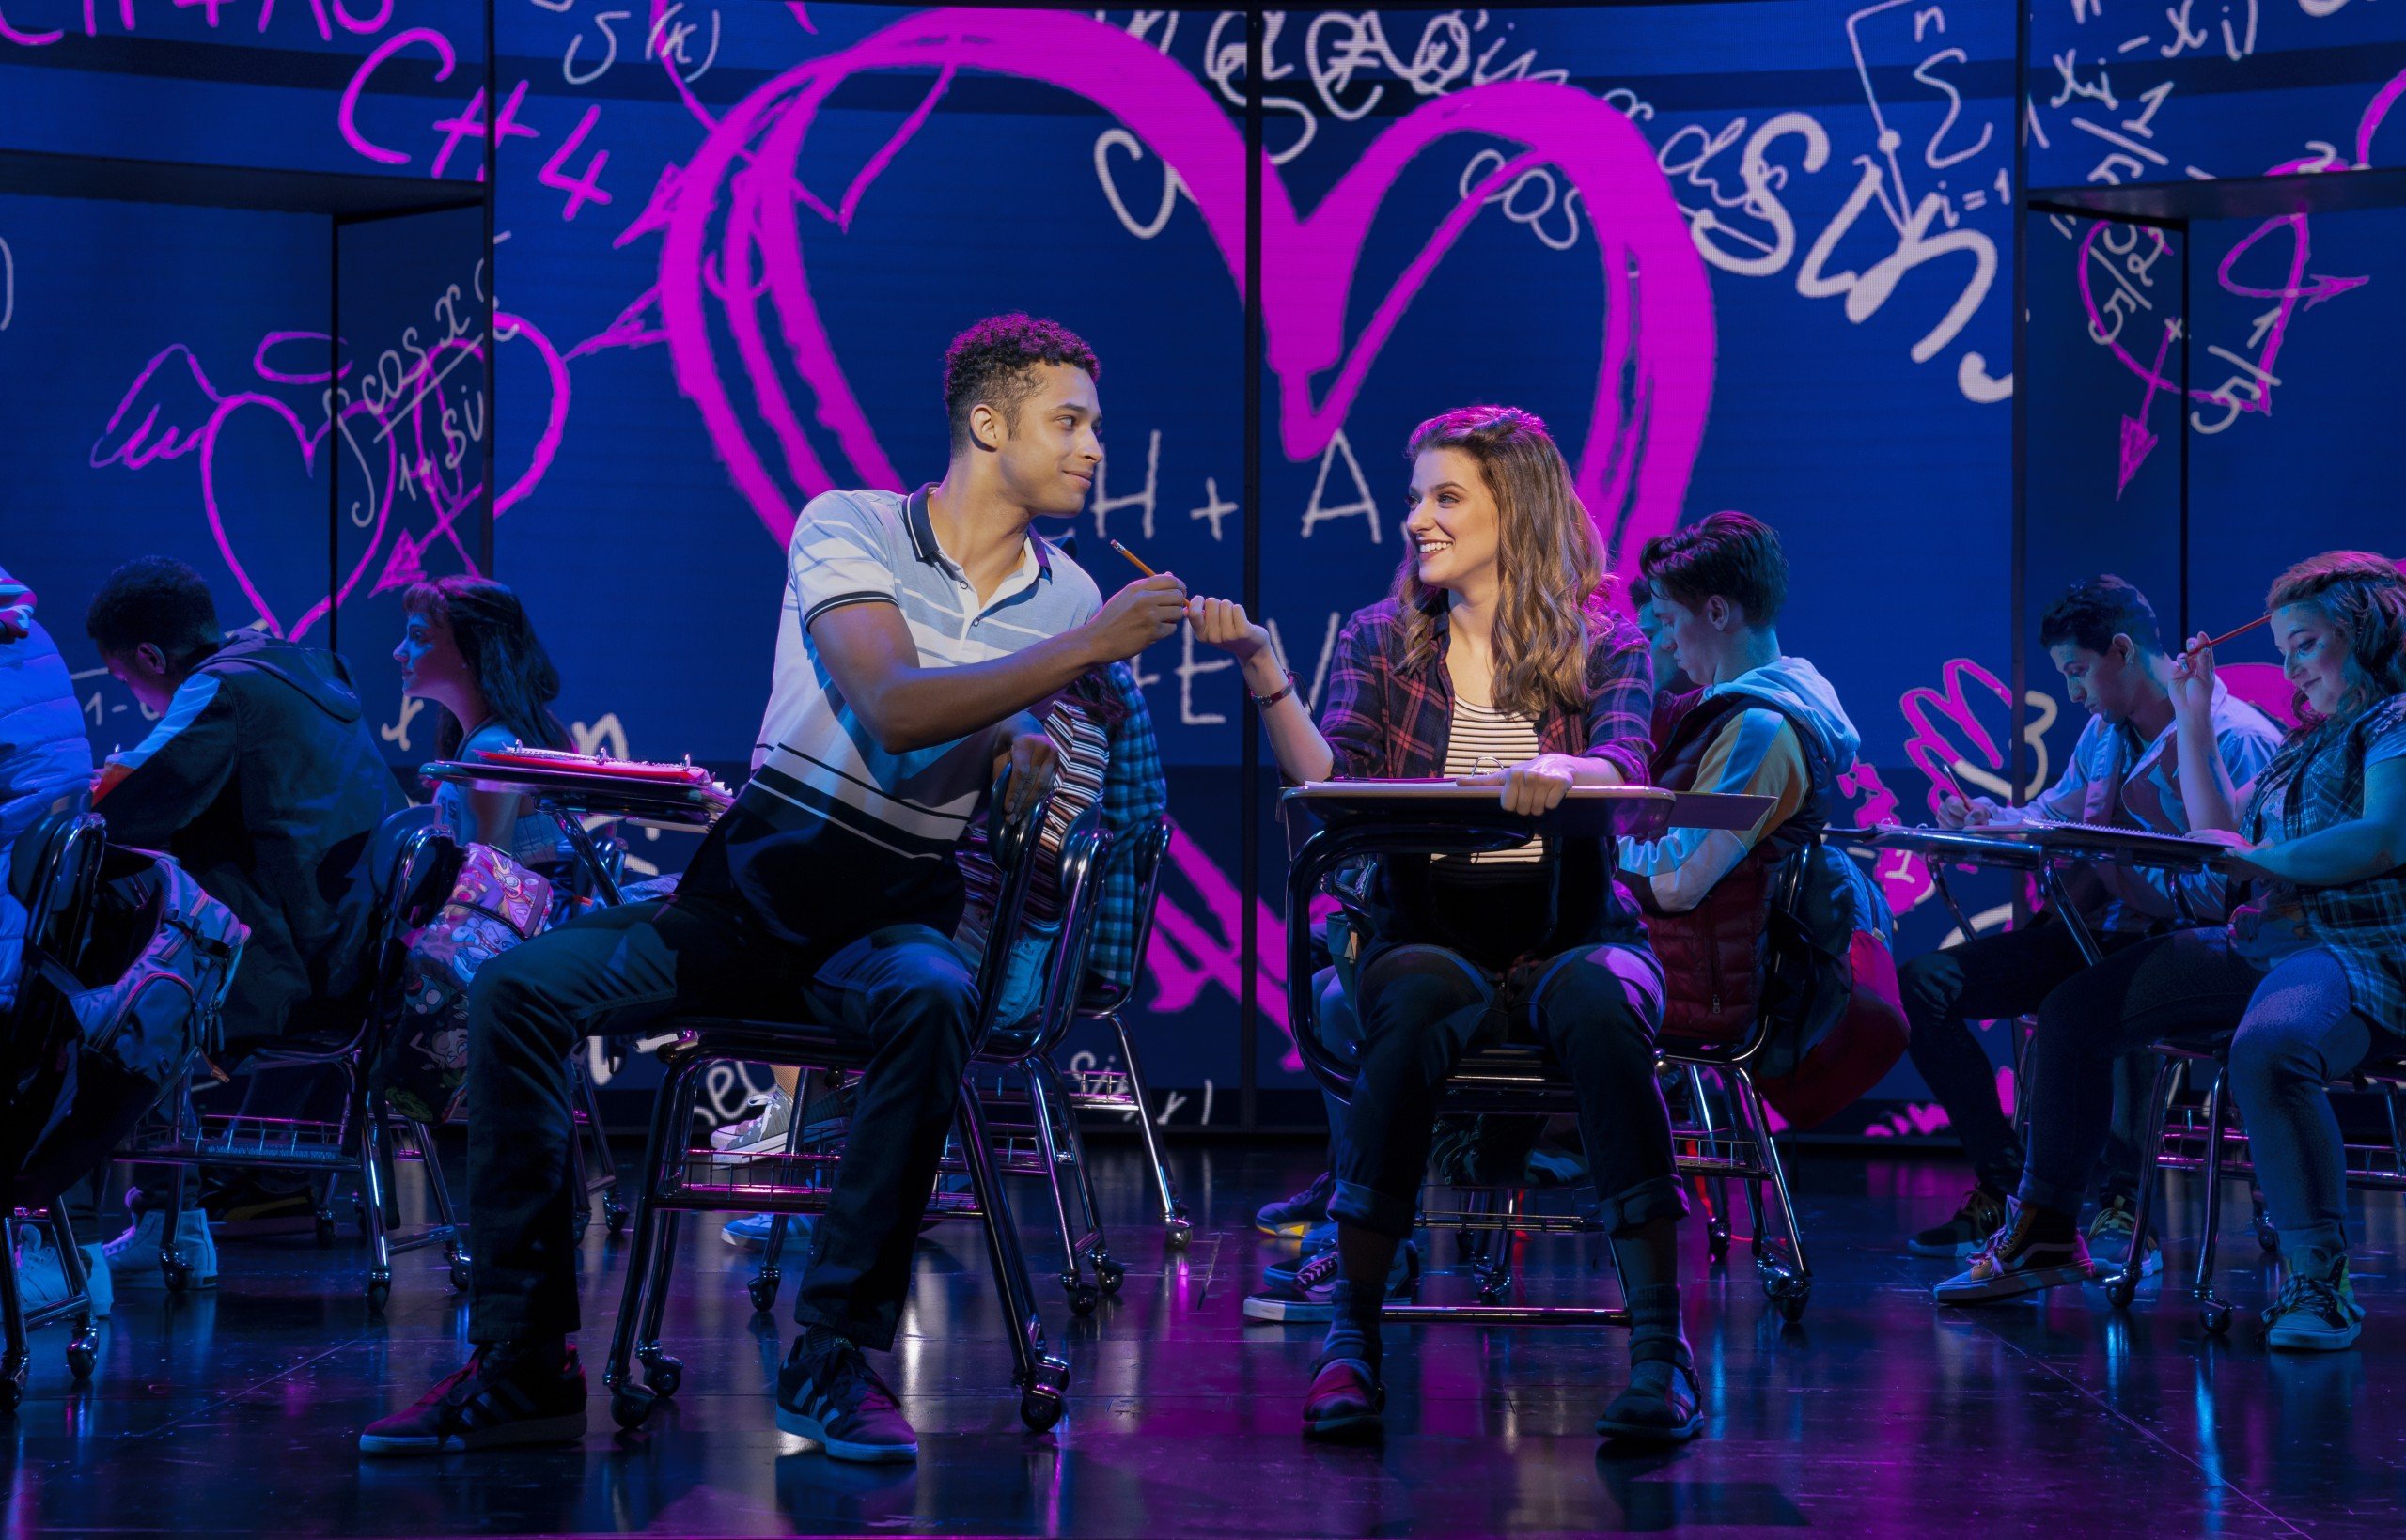 Mean Girls Musical is So Fetch at the Providence Performing Arts Center